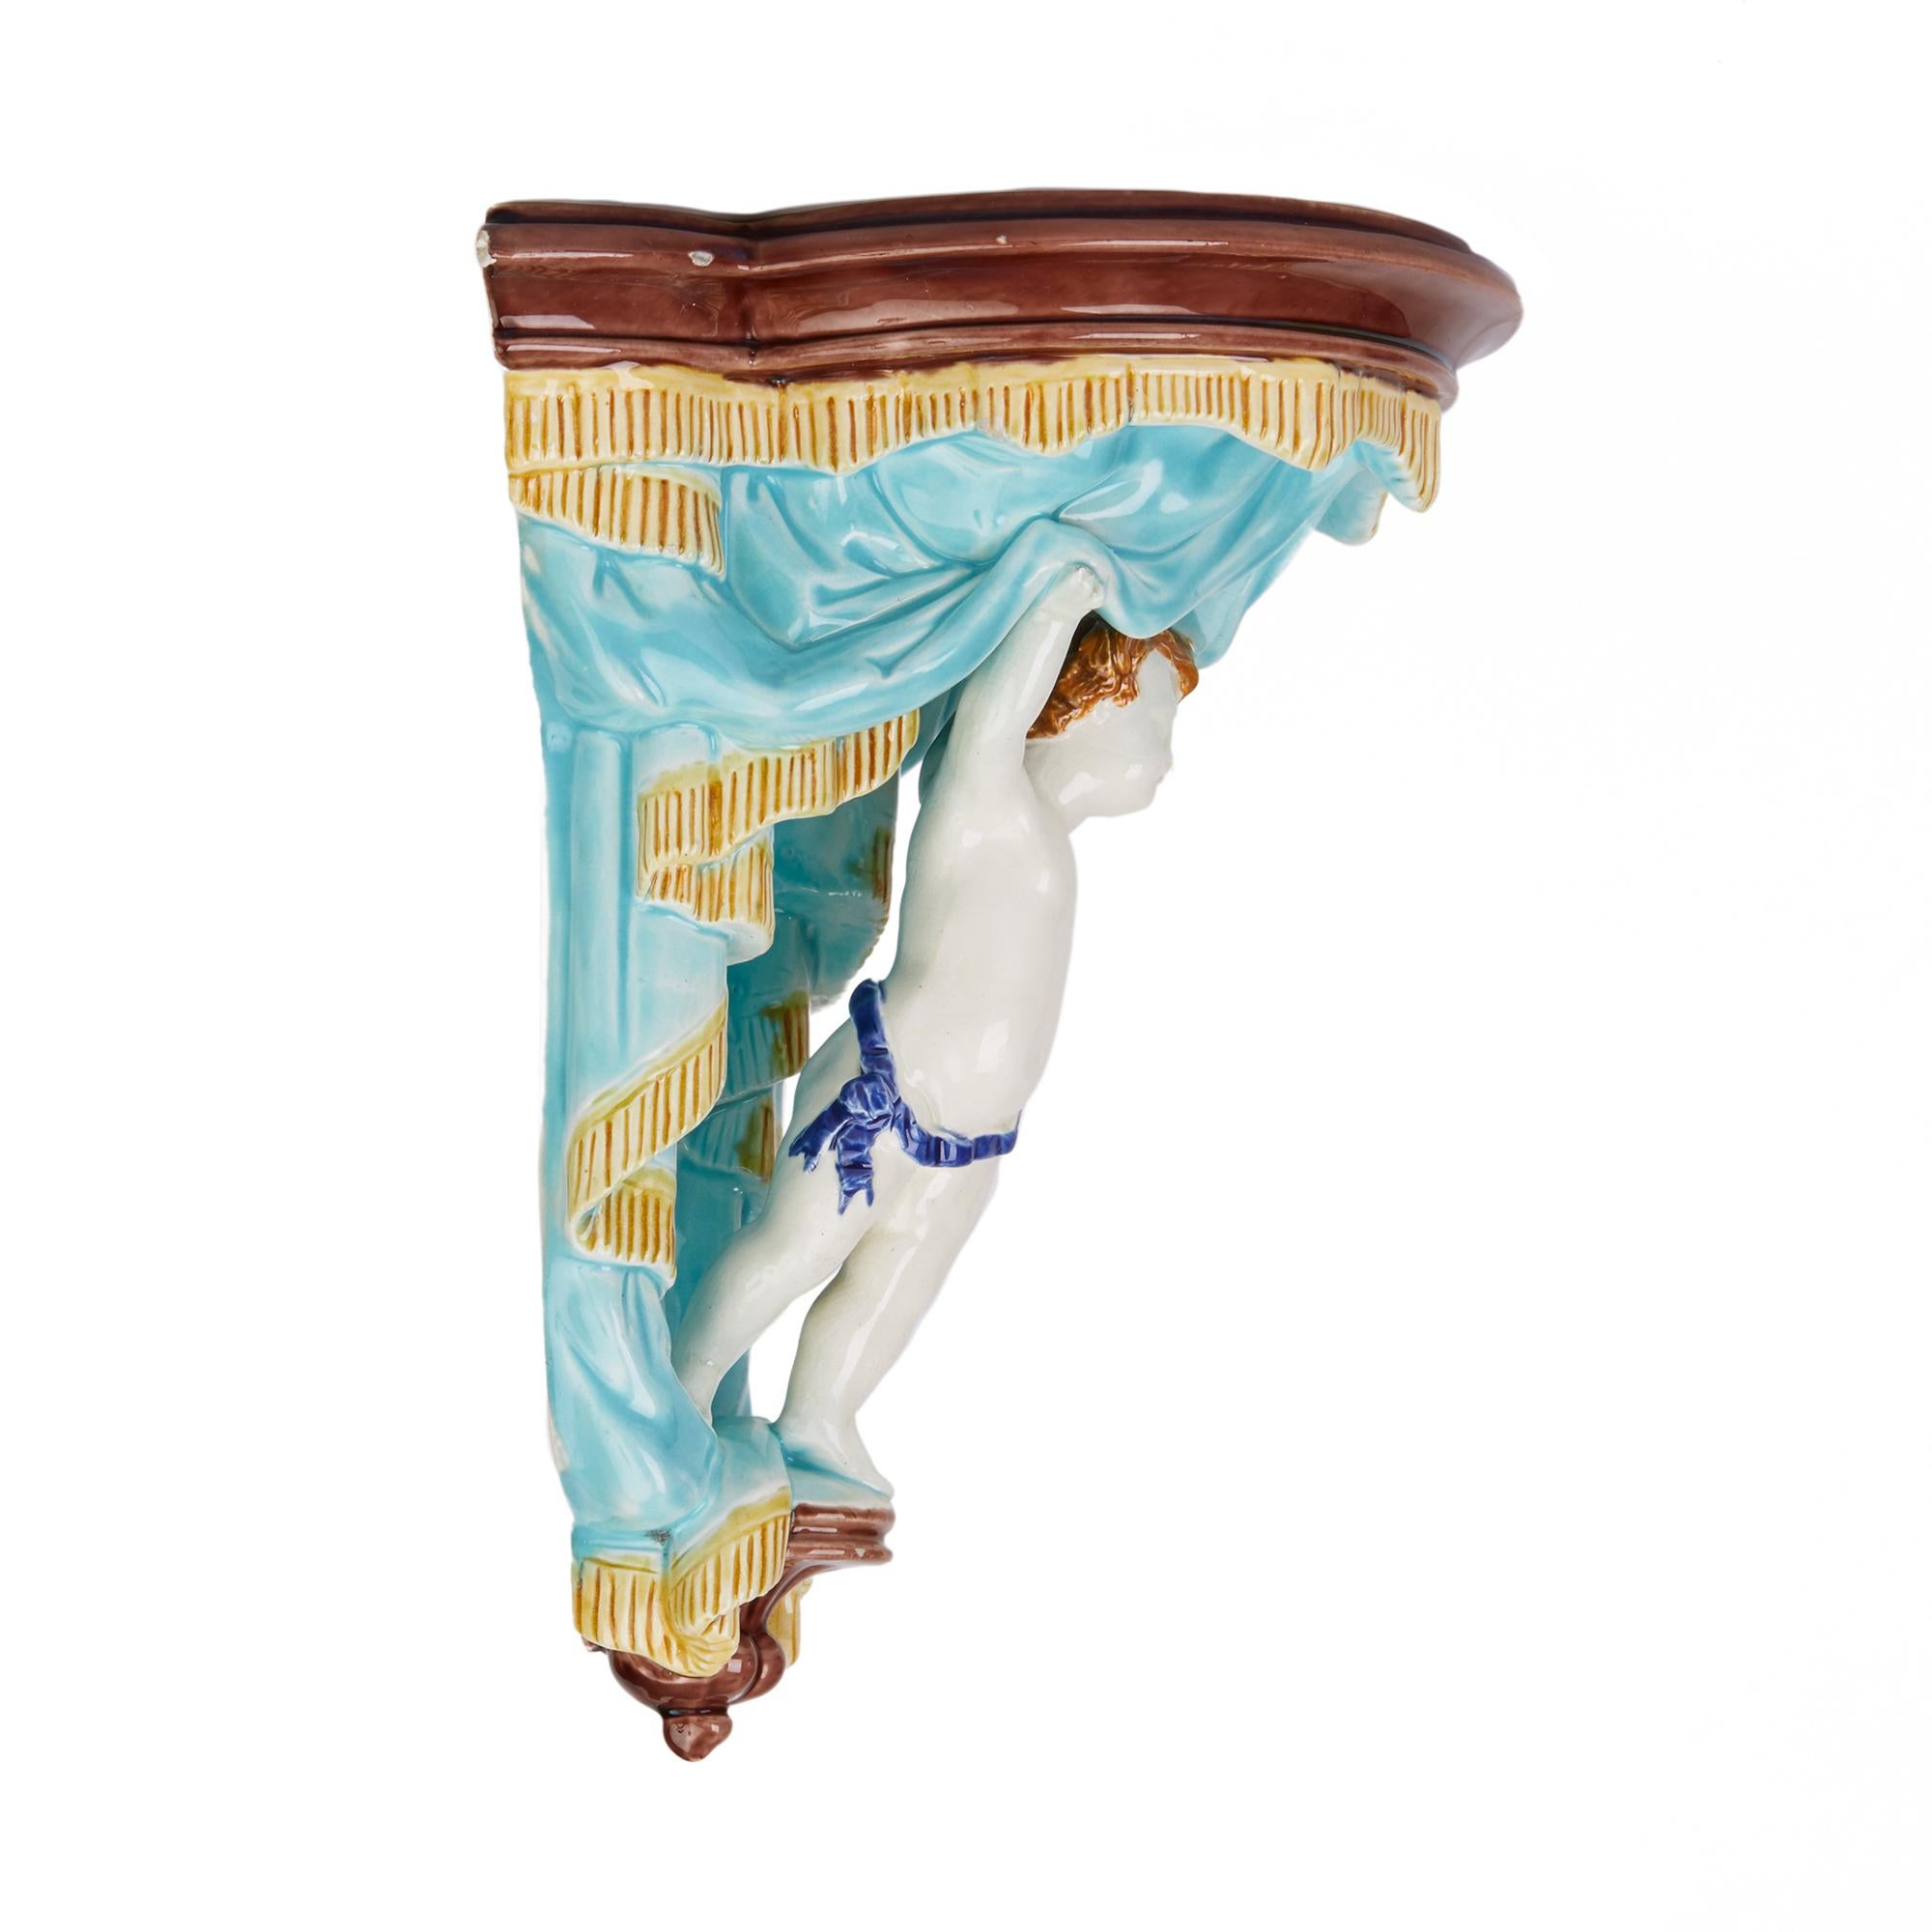 A rare and unusual antique Wedgwood Majolica pottery wall bracket dated 1872. The heavily made bracket portrays a young body standing on a narrow pedestal base supporting and lifting a curtain with tasseled edge below and edged overhang forming the